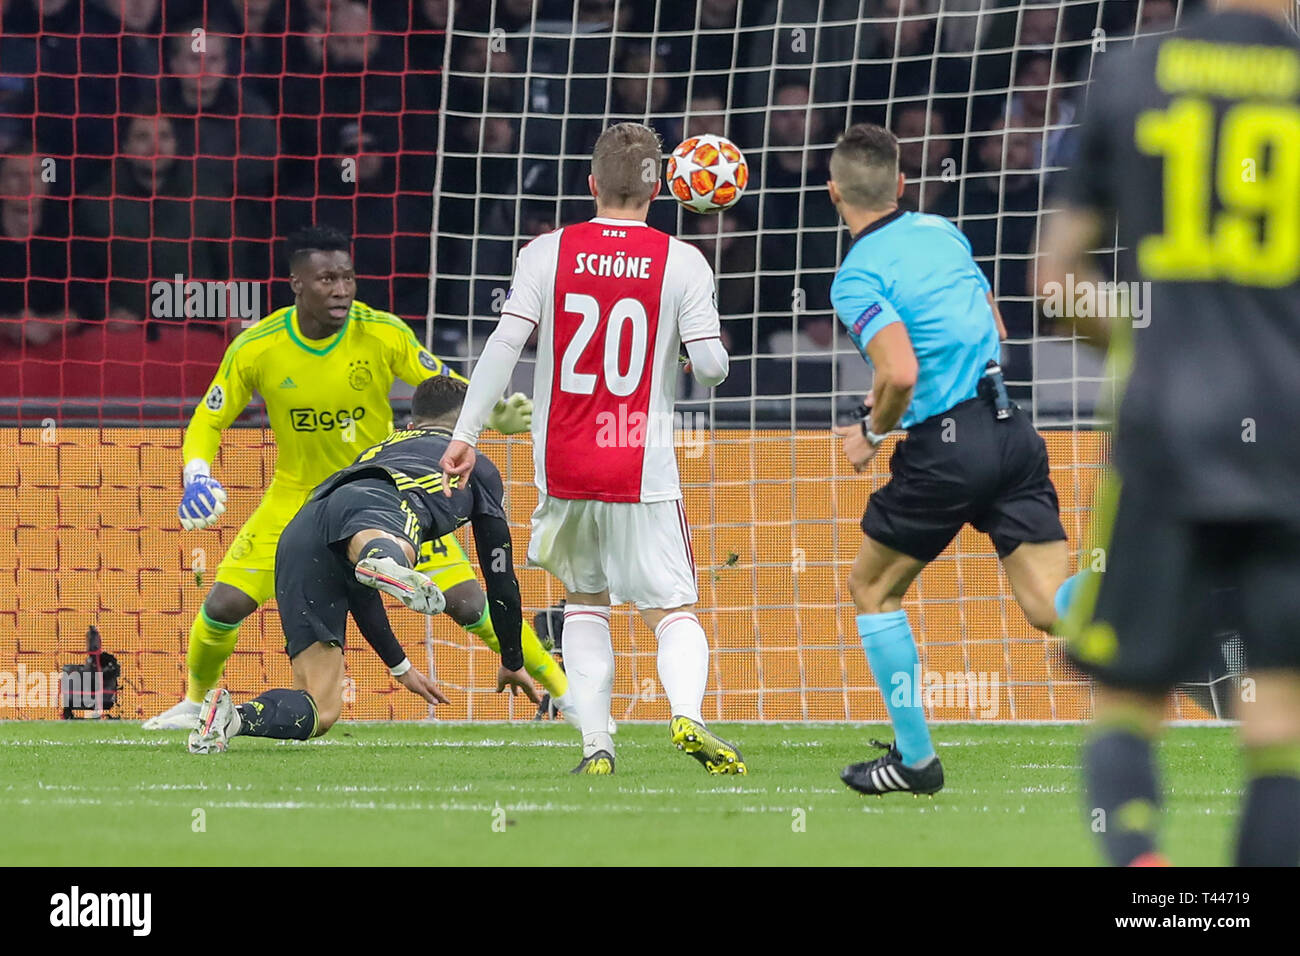 10th of april 2019 Amsterdam, The Netherlands Soccer Champions League Ajax v Juventus   Christiano Ronaldo of Juventus scores  l-r goalkeeper Andre Onana of Ajax, Christiano Ronaldo of Juventus, Lasse Schone of Ajax, scheidsrechter Felix Brych (GER) Stock Photo